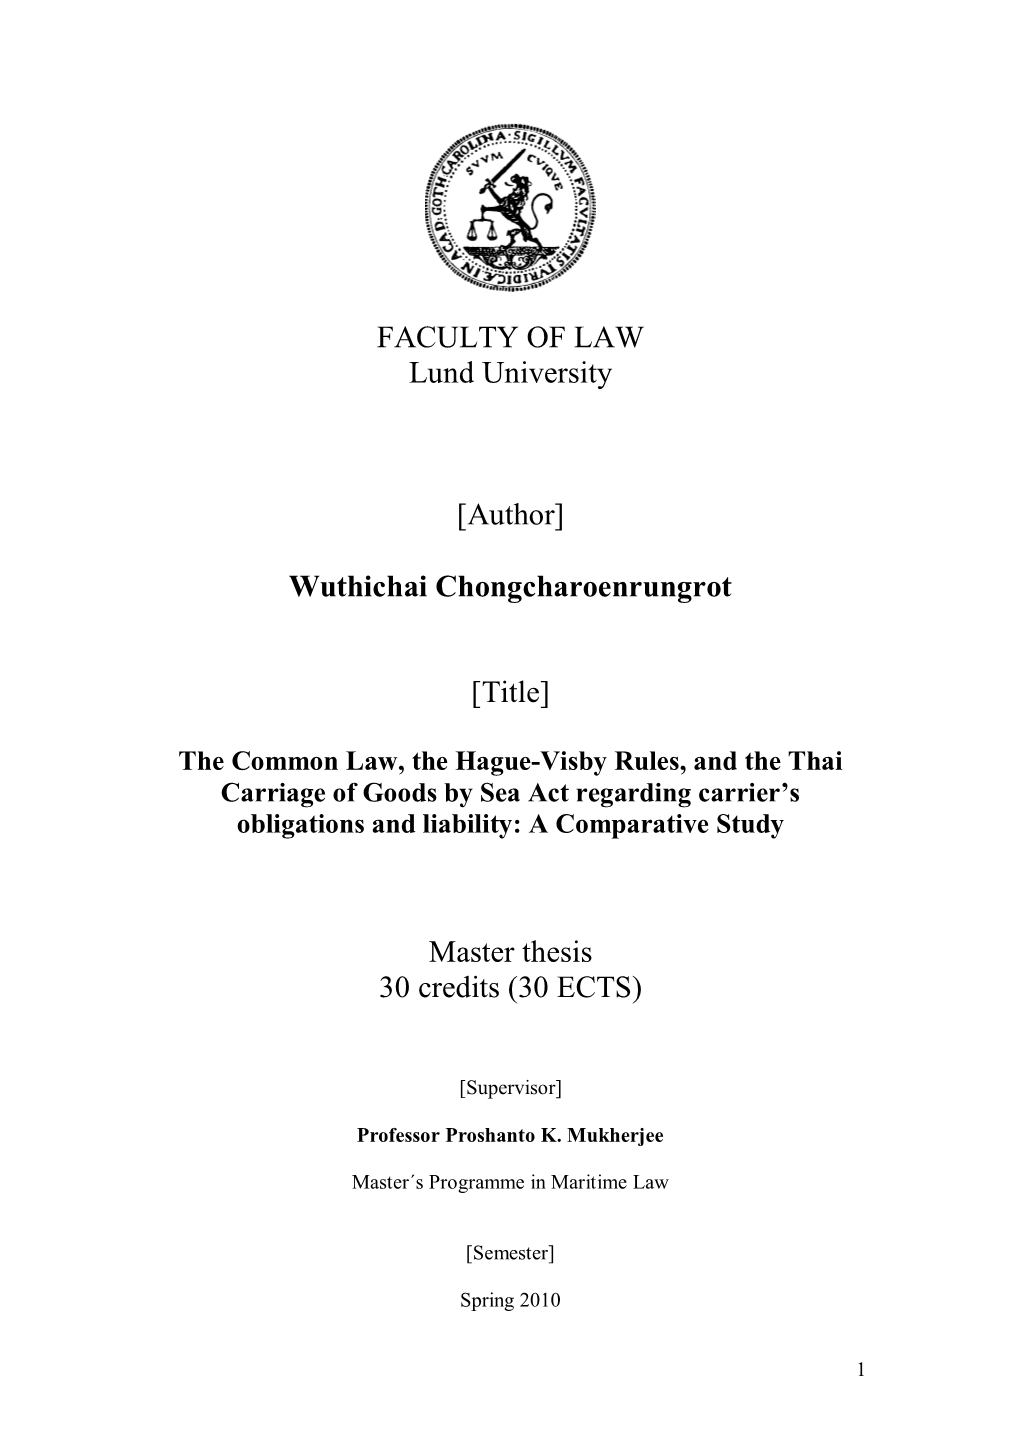 The Common Law, the Hague-Visby Rules, and the Thai Carriage of Goods by Sea Act Regarding Carrier’S Obligations and Liability: a Comparative Study